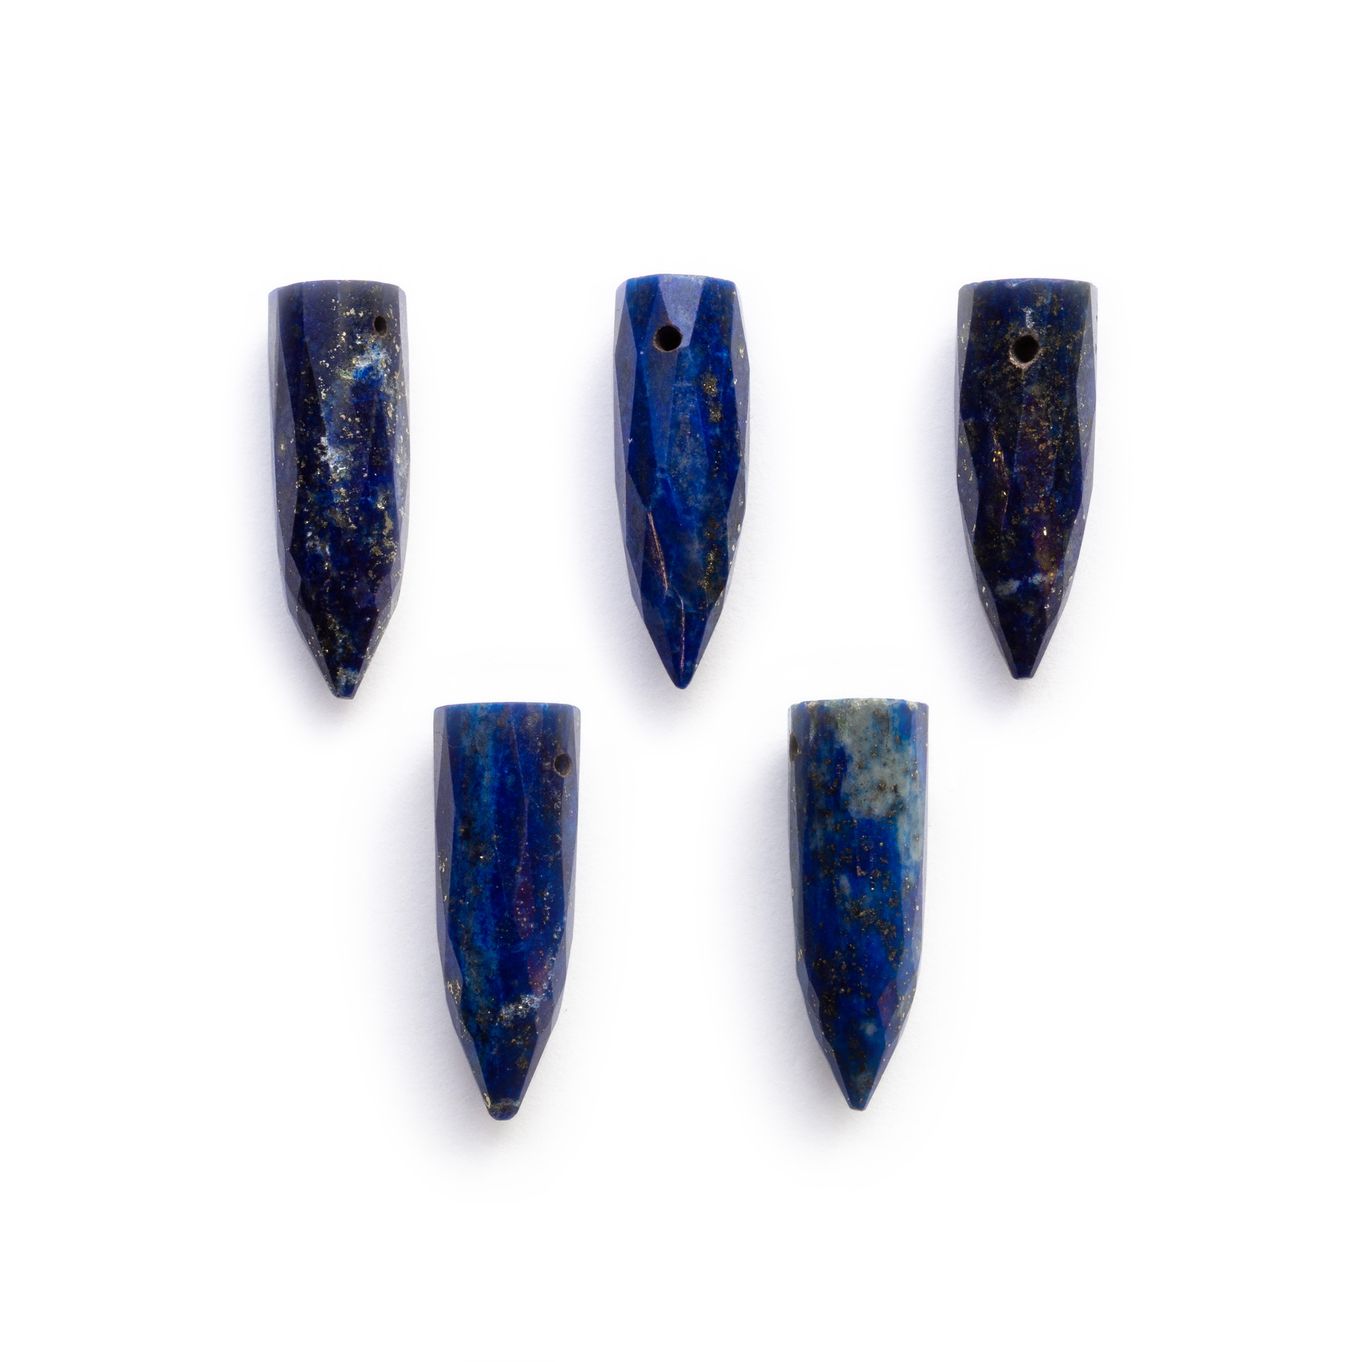 Lapis Lazuli Half Moon Beads 8 inch 13 pieces – The Bead Traders